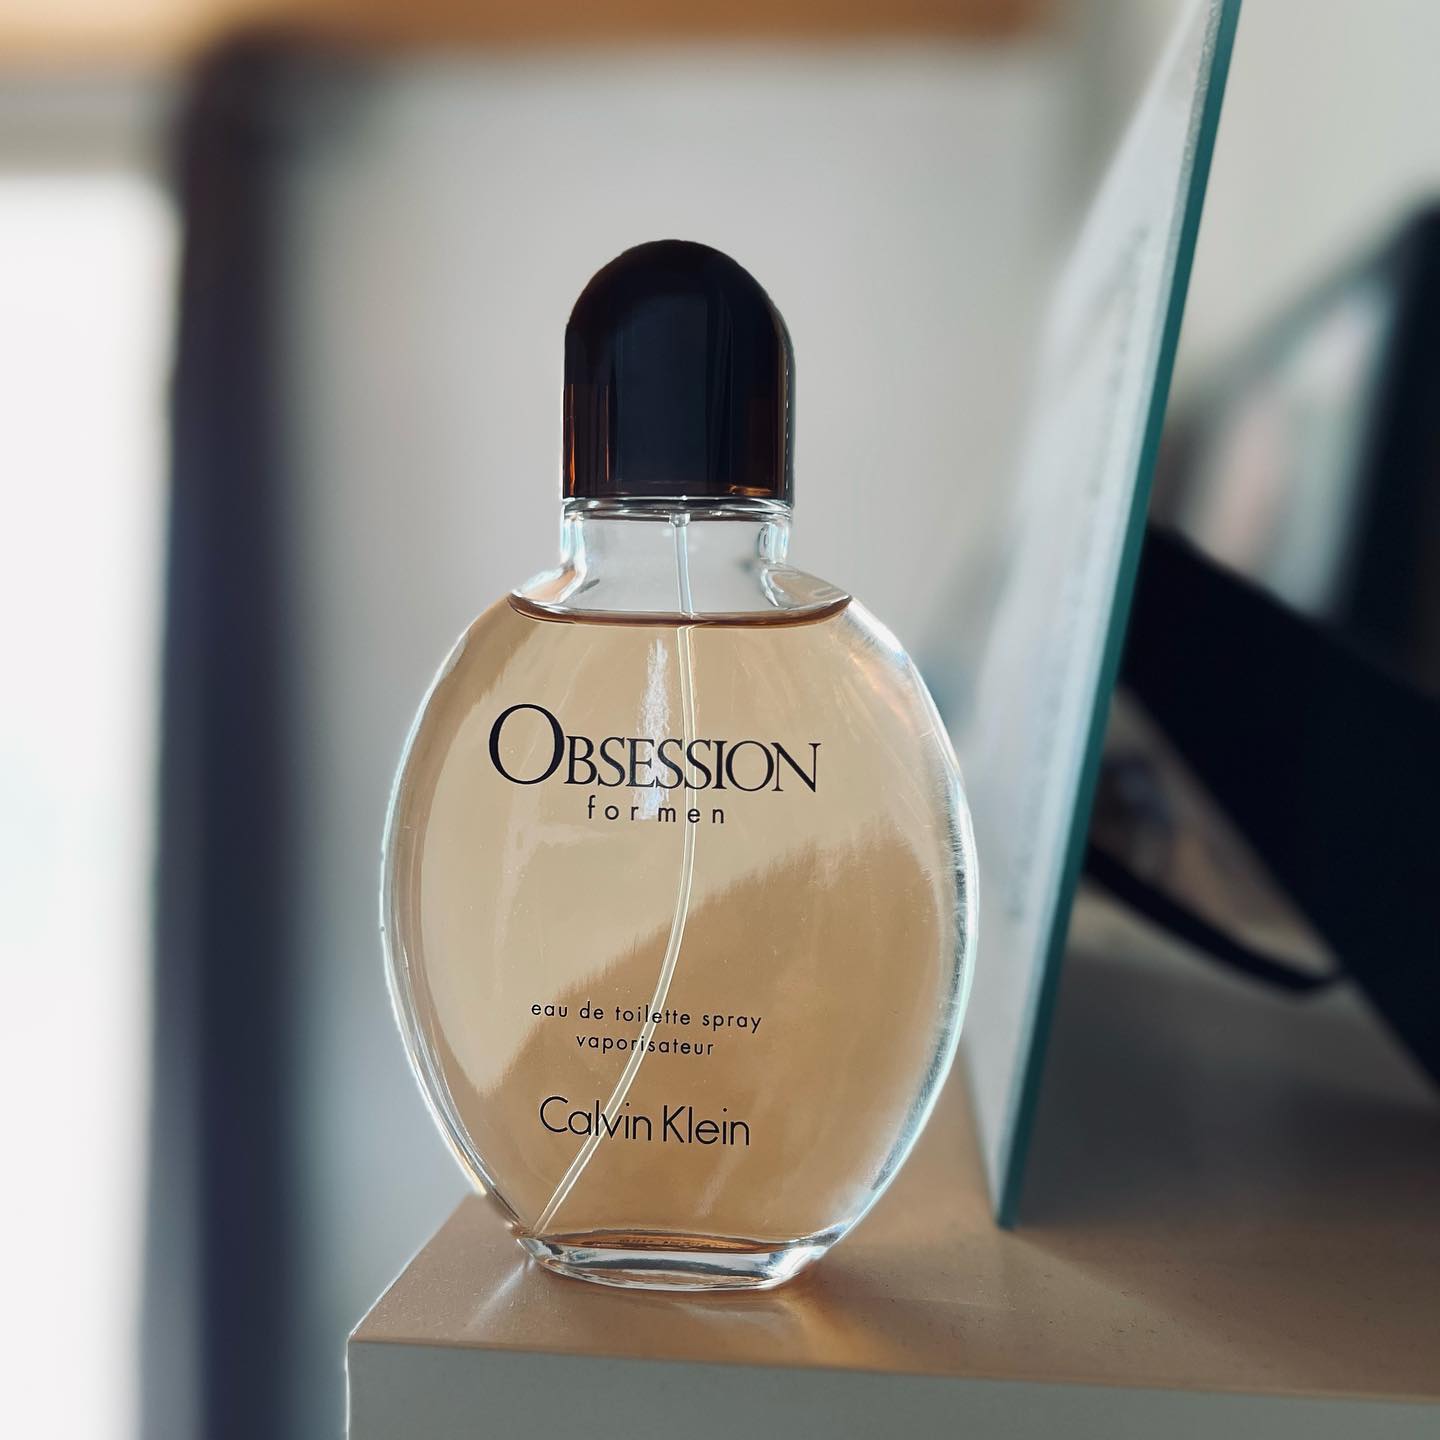 a bottle of Calvin Klein Obsession on the Table